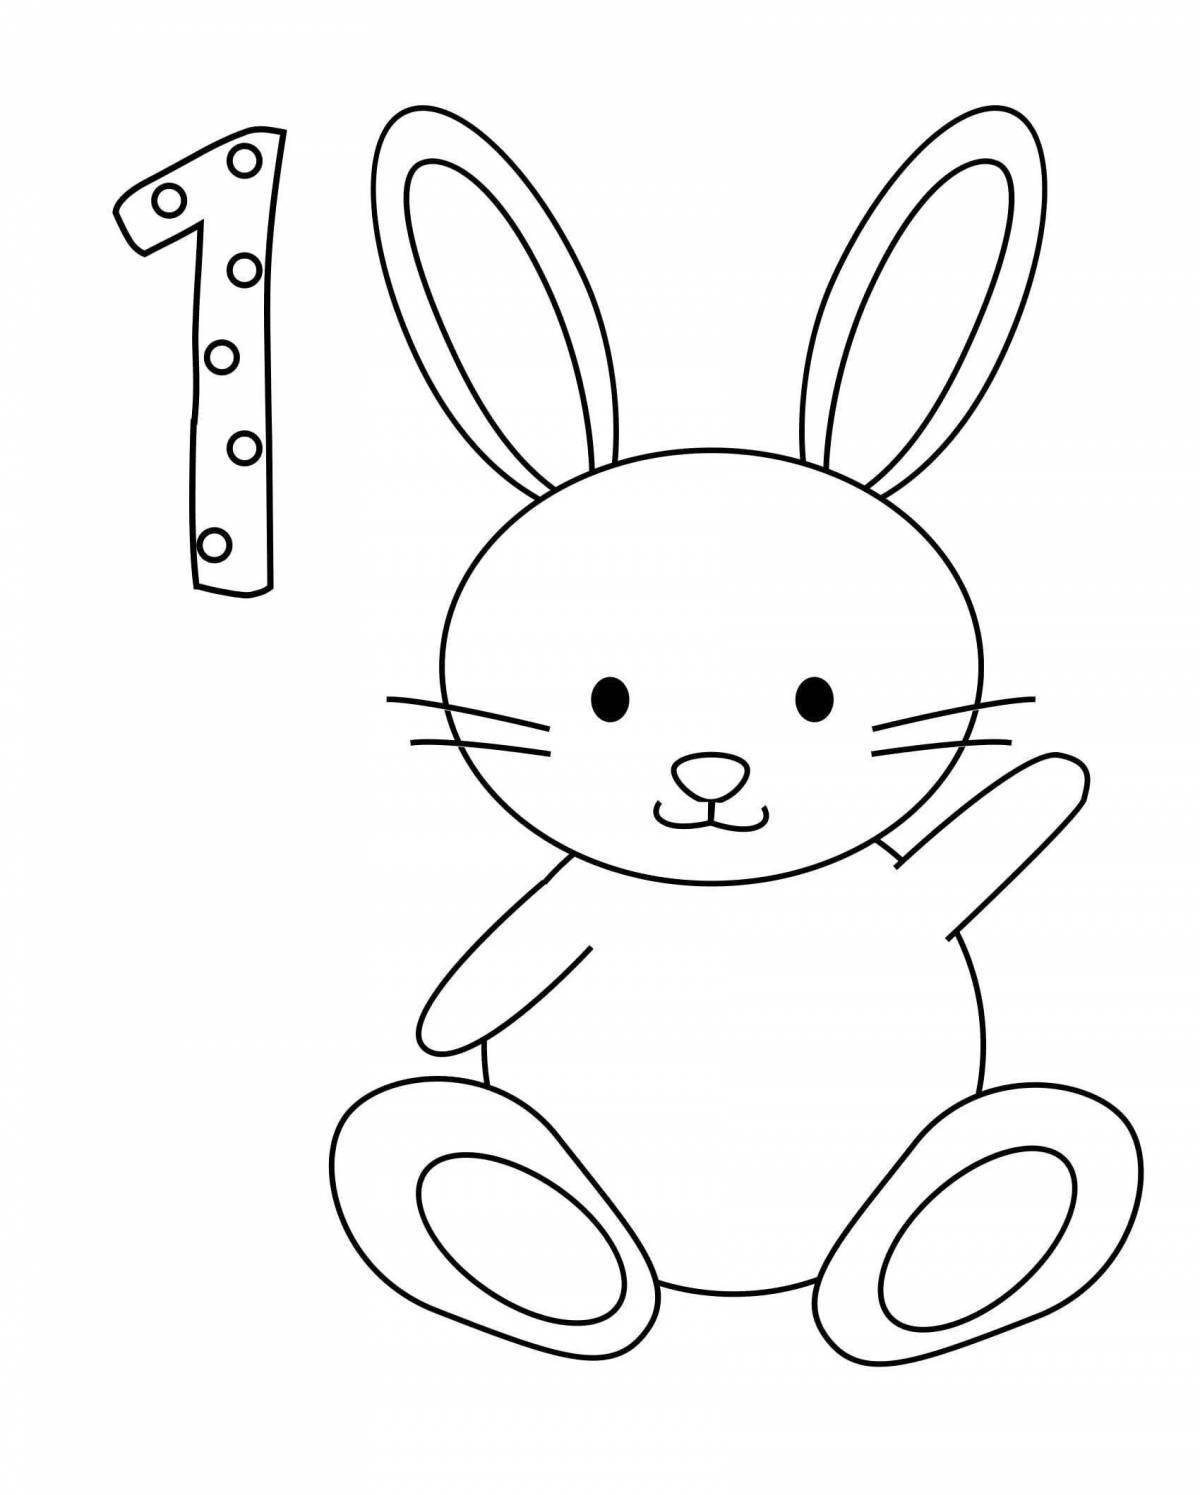 Creative rabbit coloring book for 2-3 year olds